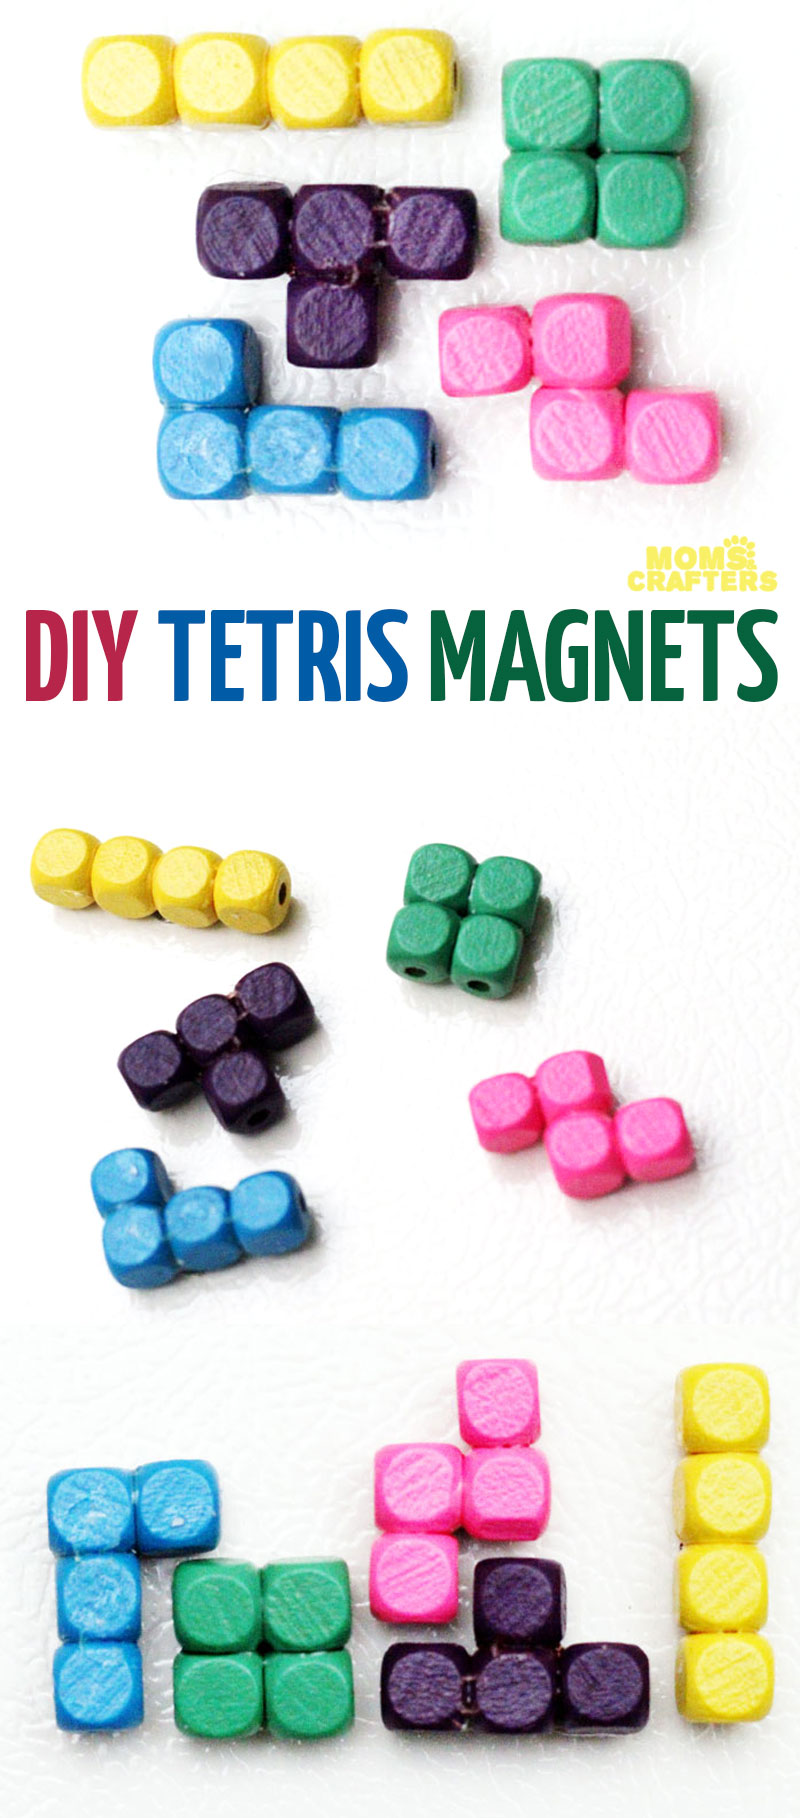 It takes minutes and costs pennies to make these Tetris magnets! - It takes minutes and costs pennies to make these Tetris magnets! -   16 quick diy Crafts ideas